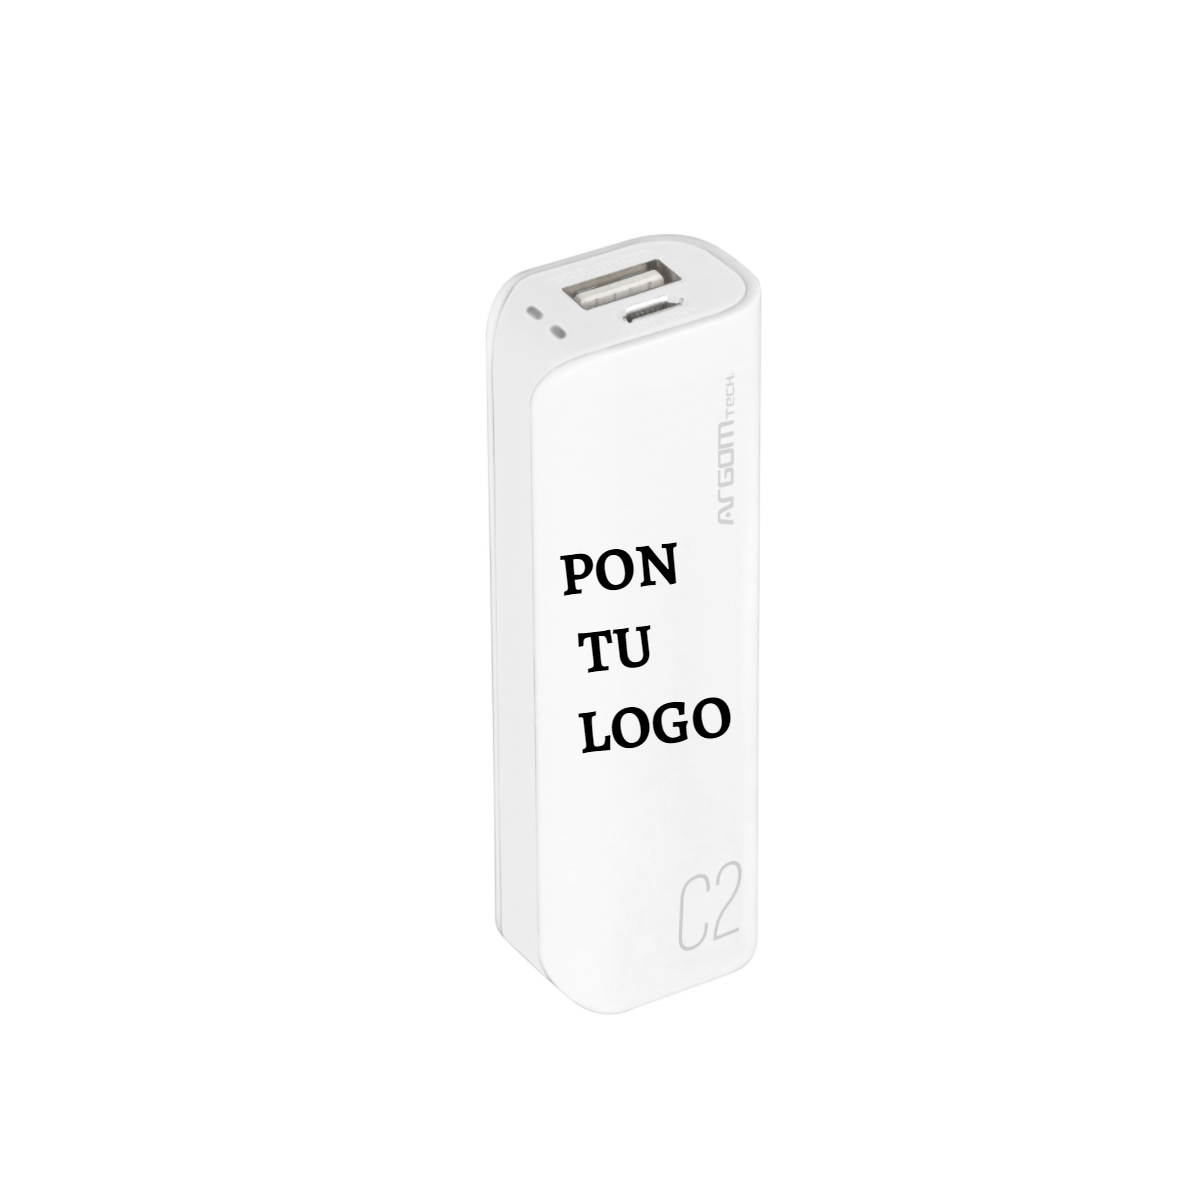 100 PERSONALIZED POWER BANK C2 2500MAH WHIT YOUR LOGO